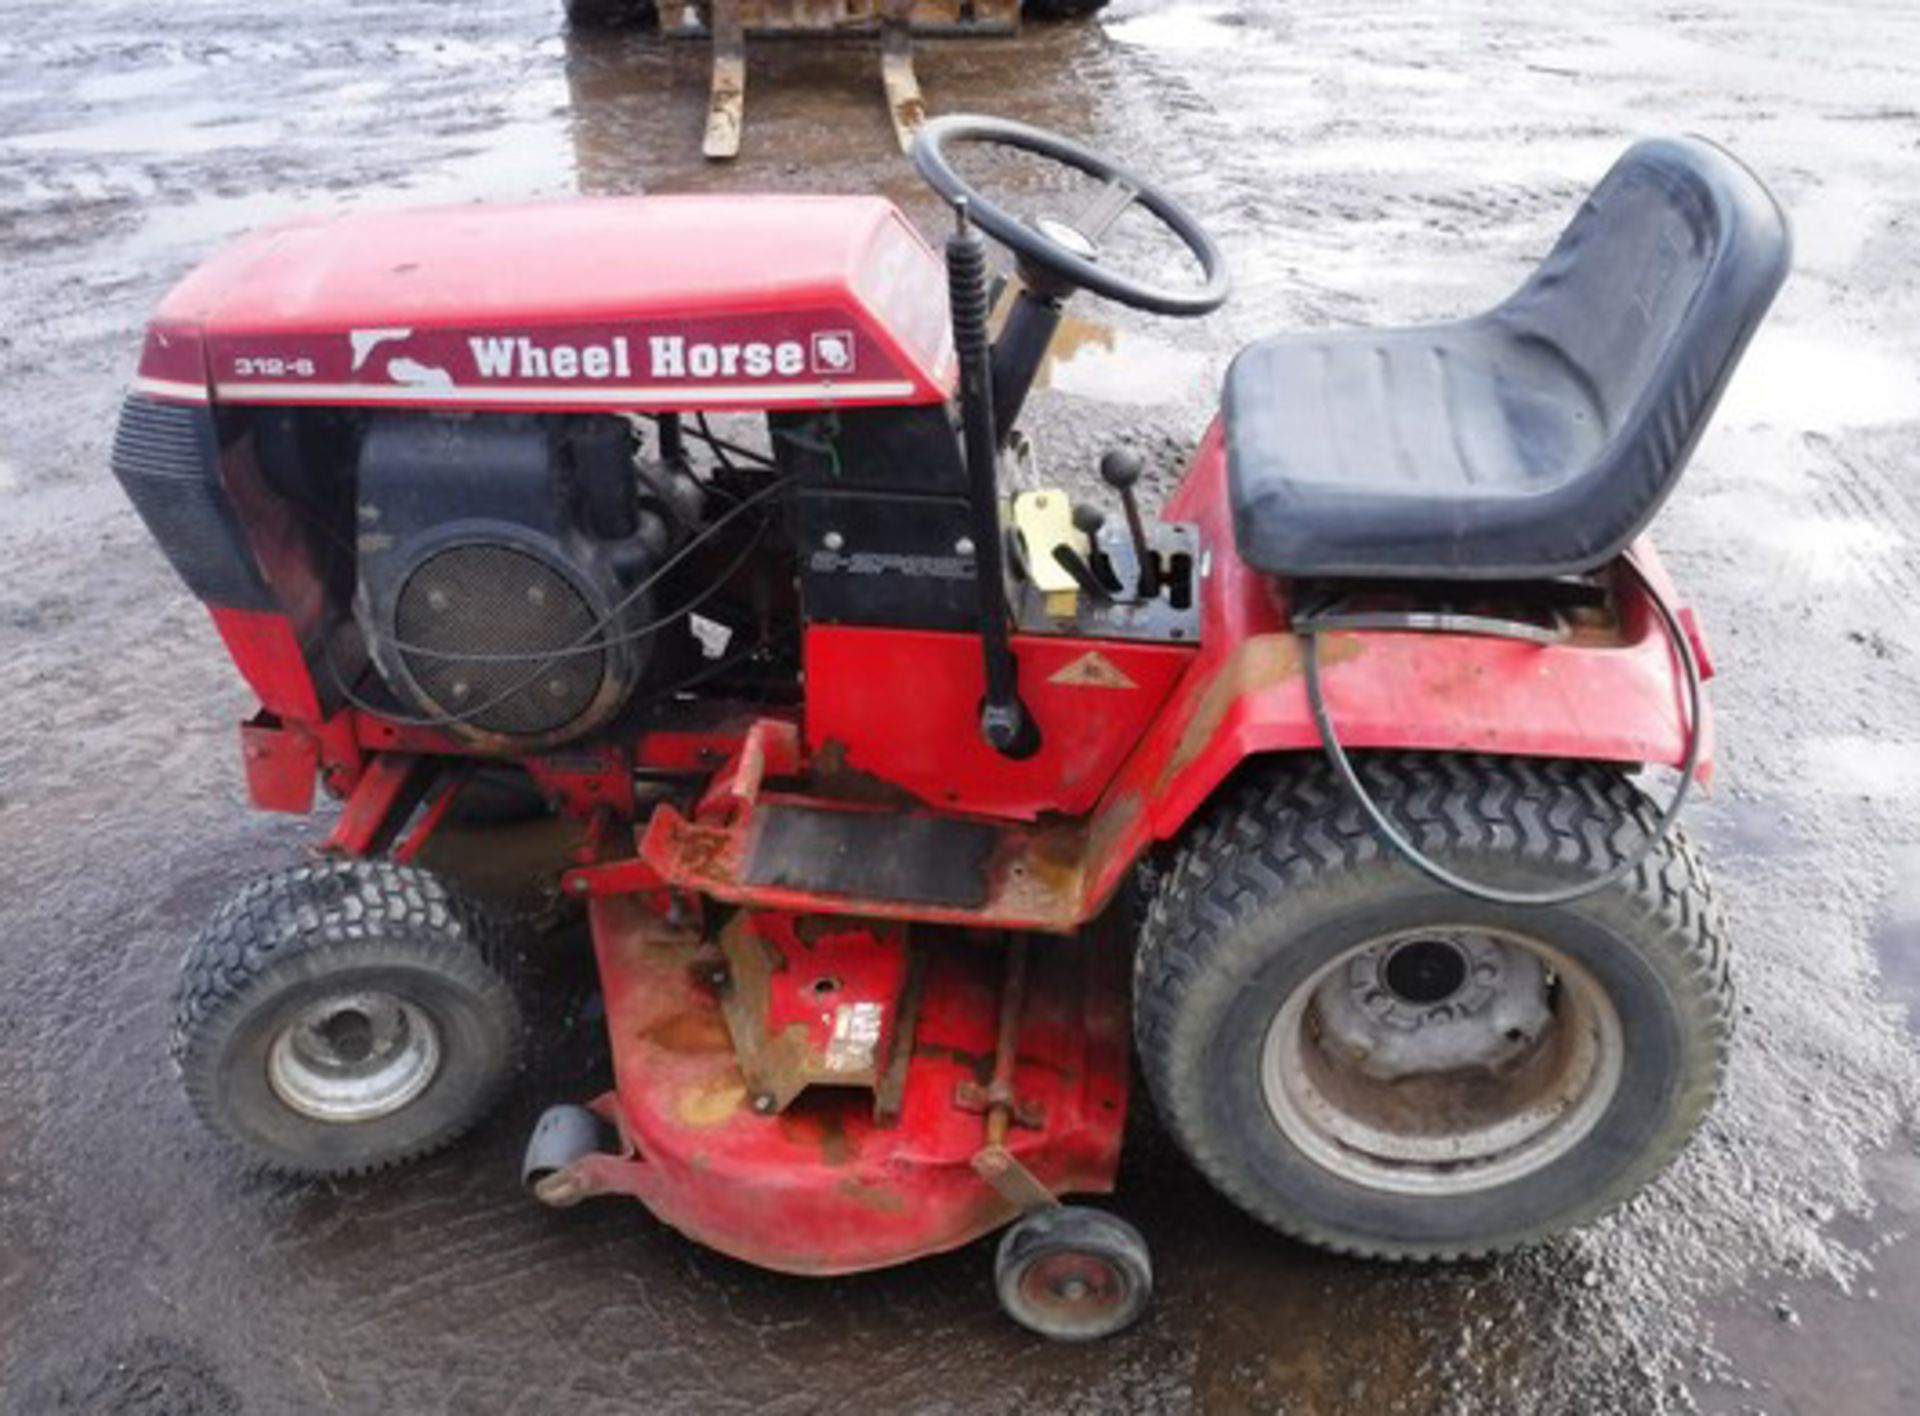 1986 WHEEL HORSE 312.8 LAWN TRACTOR VIN - 21-12K-802-16902, ENGINE NO - 1600649564, 1389HRS (NOT VER - Image 10 of 11